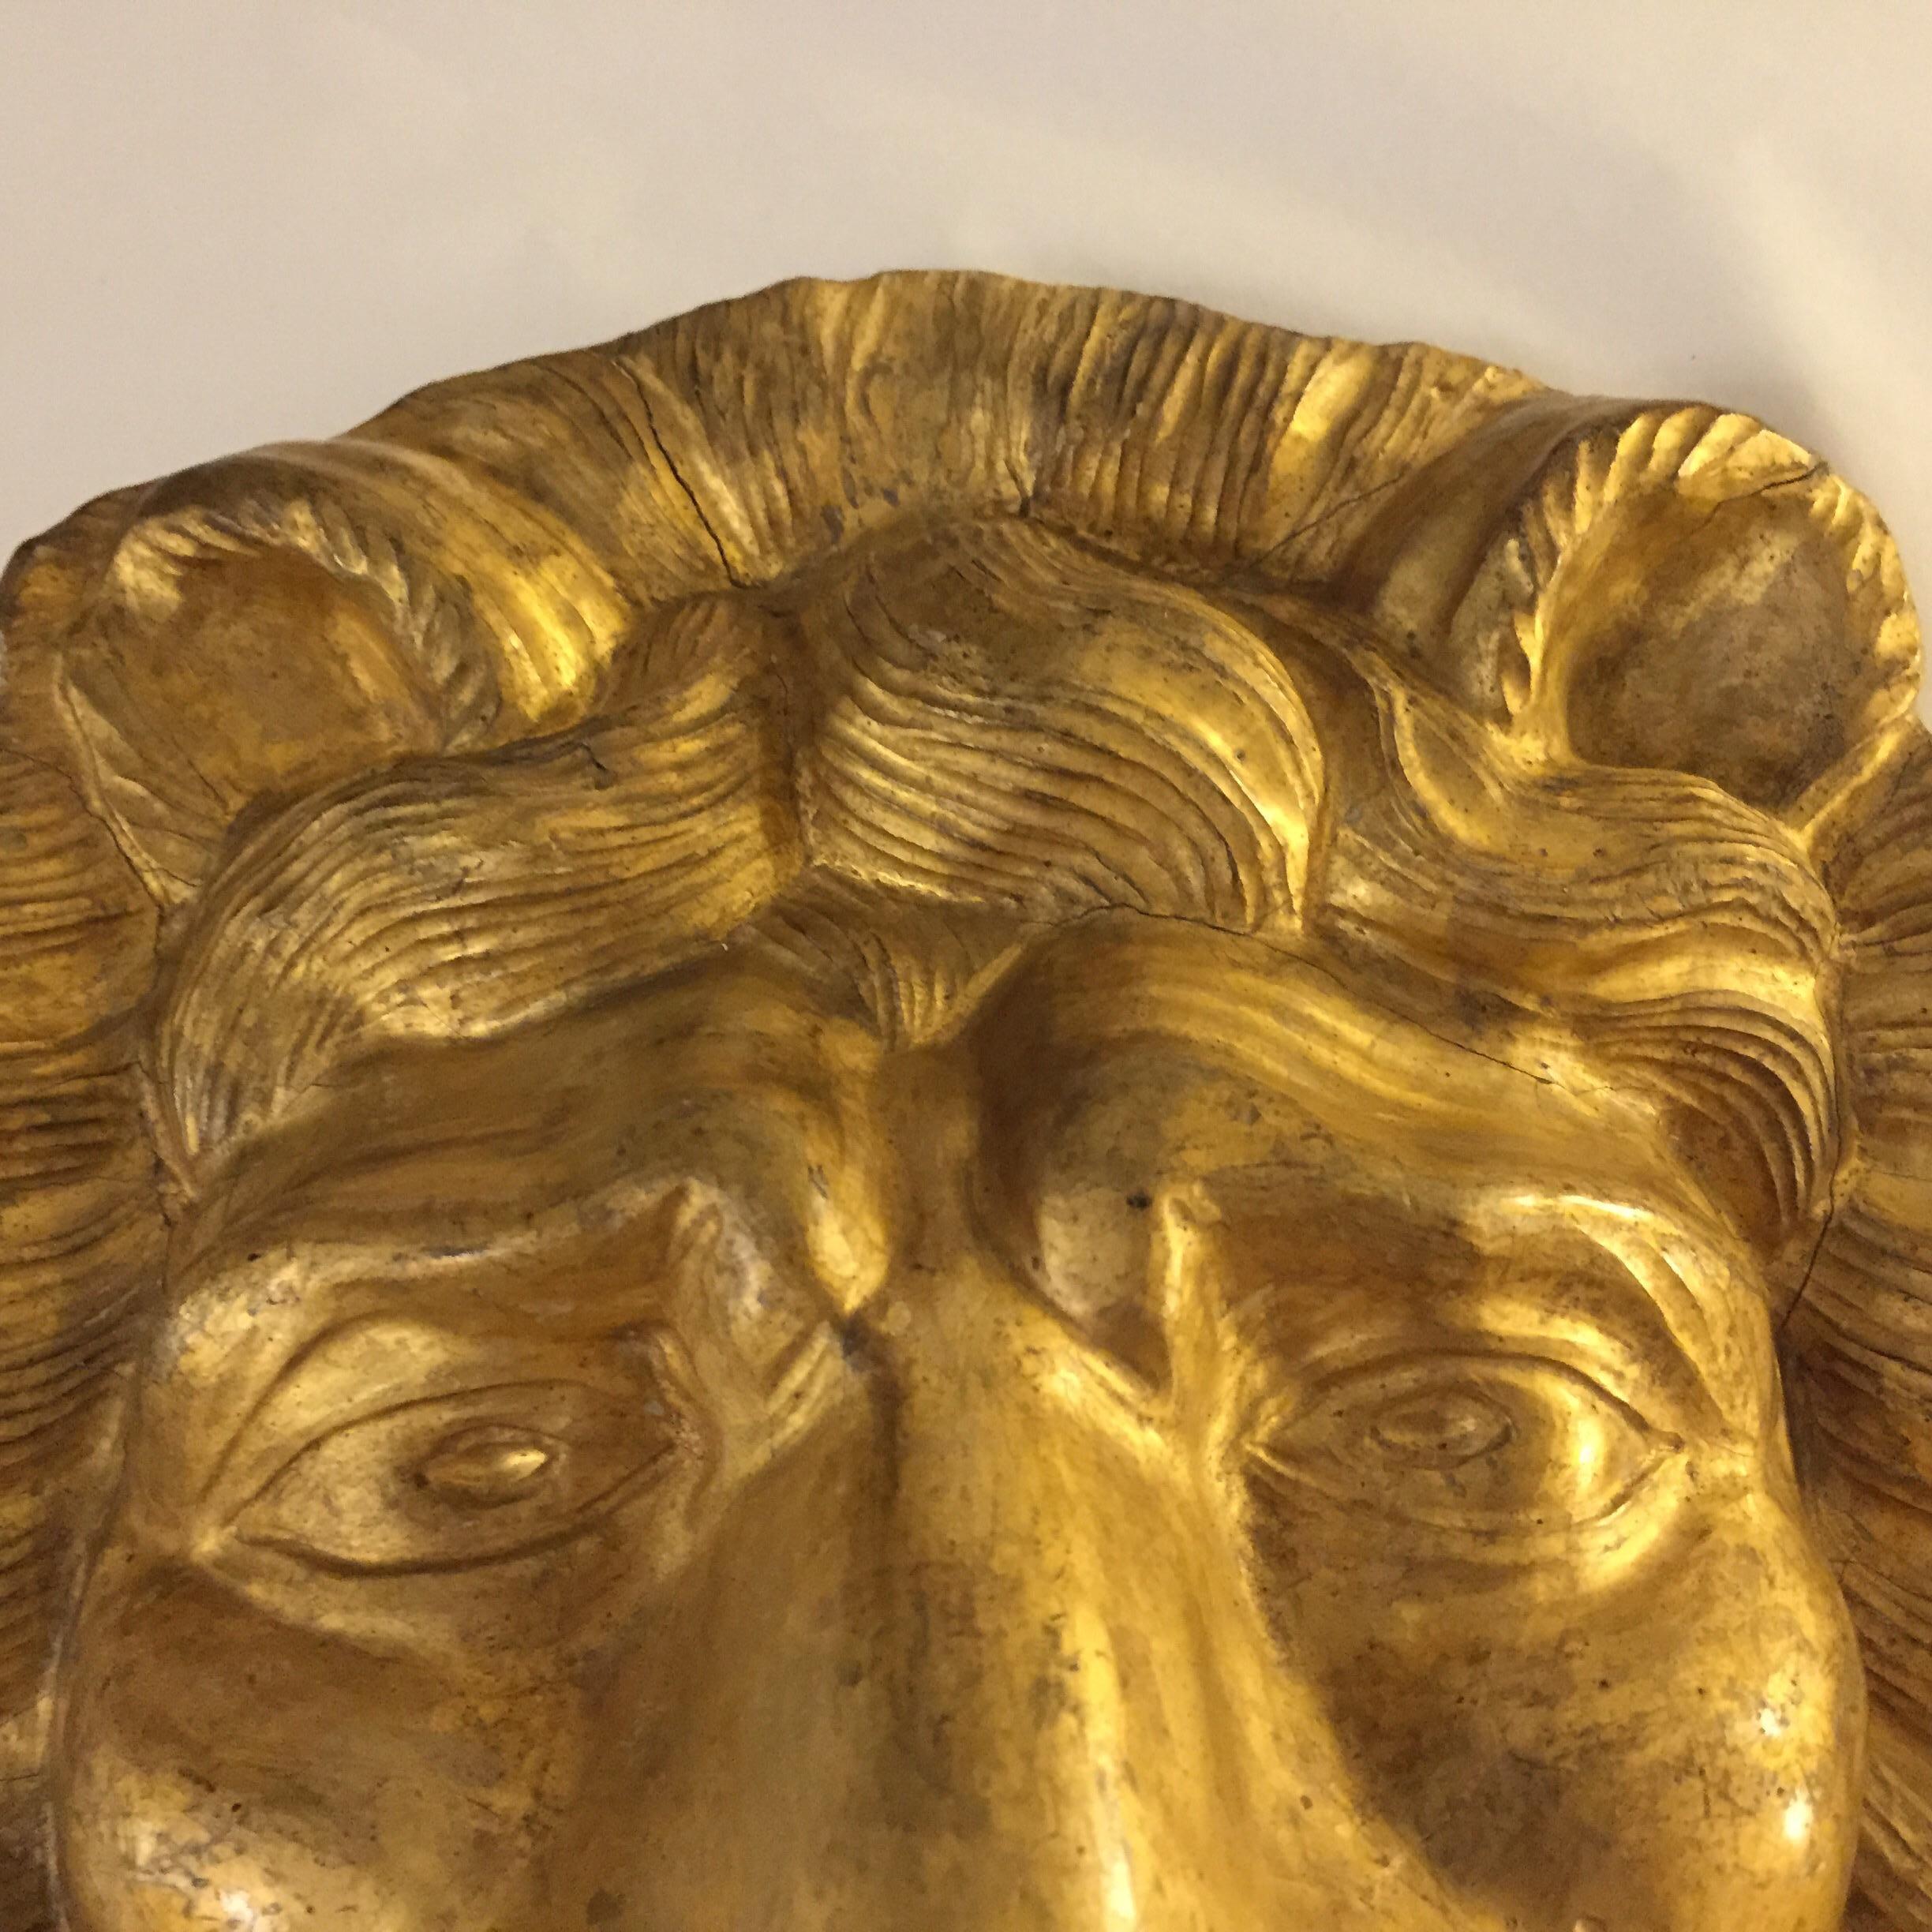 Baroque Mid-19th Century Pair of Italian Masks Gilded Lion Head Sculptures from Tuscany